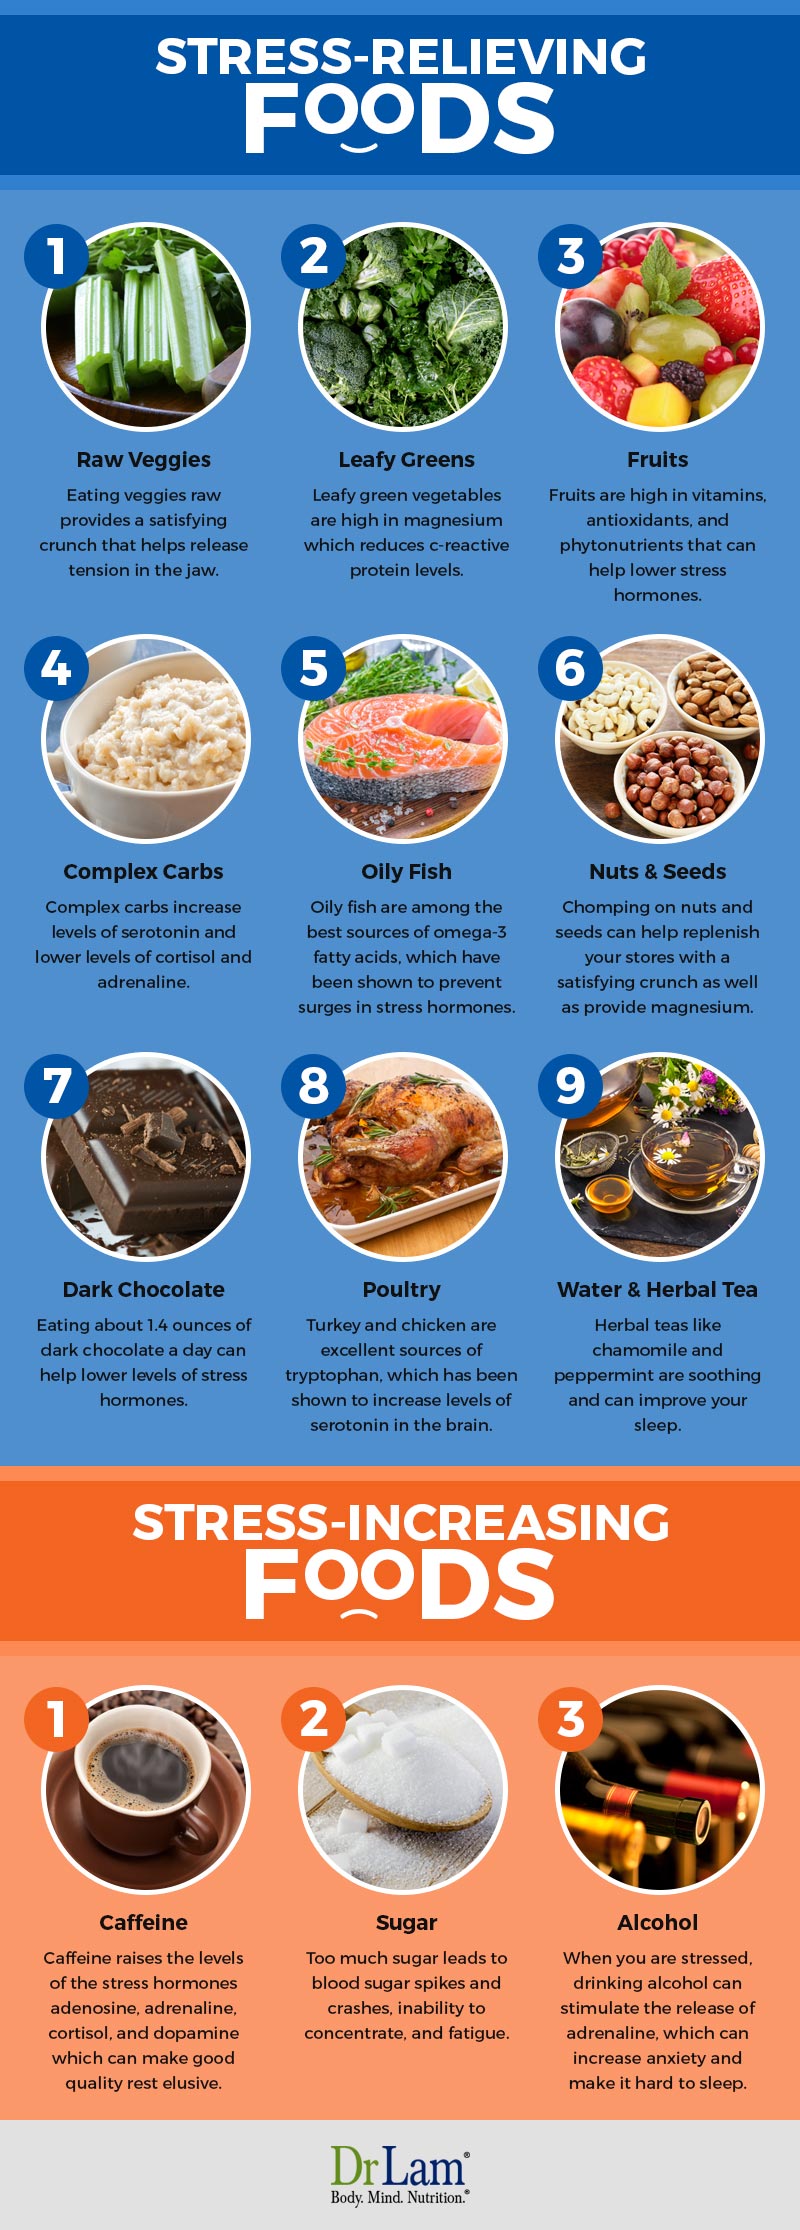 Check out this easy to understand infographic about stress relieving foods vs stress increasing foods